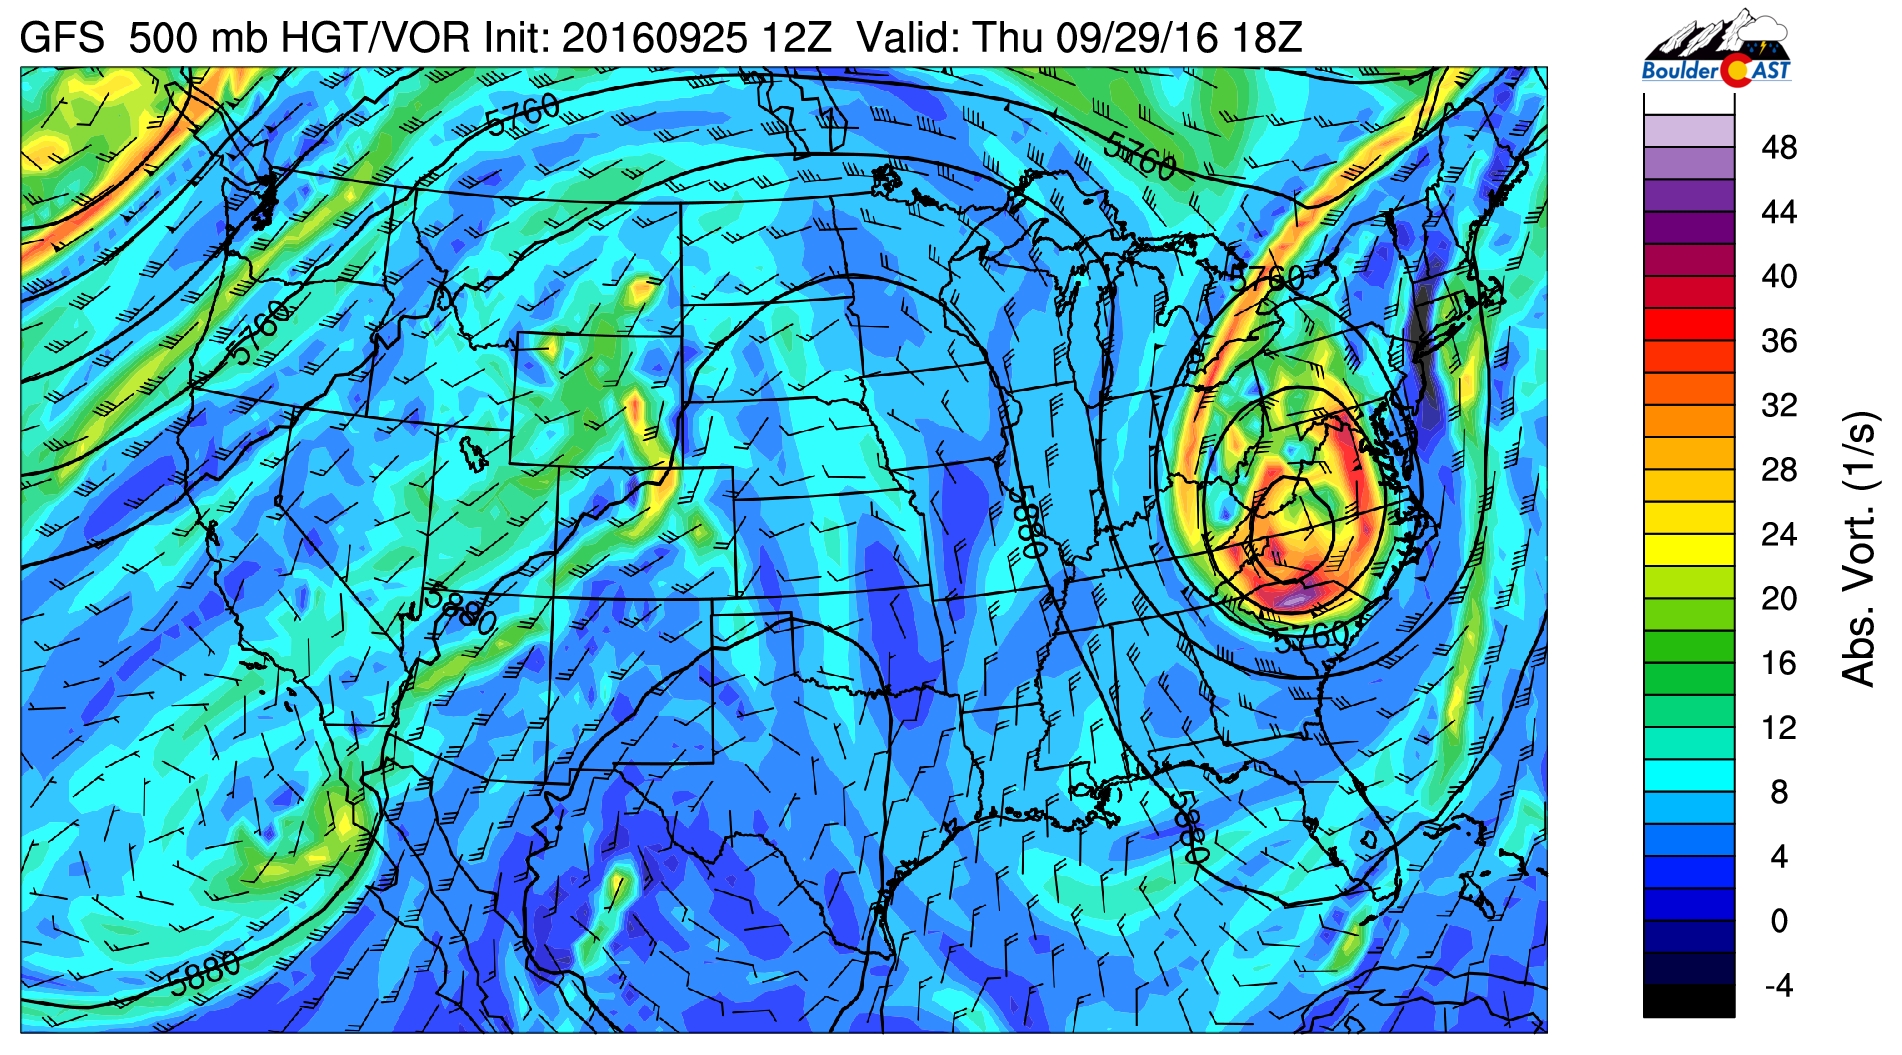 GFS 500 mb vorticity and wind for Thursday